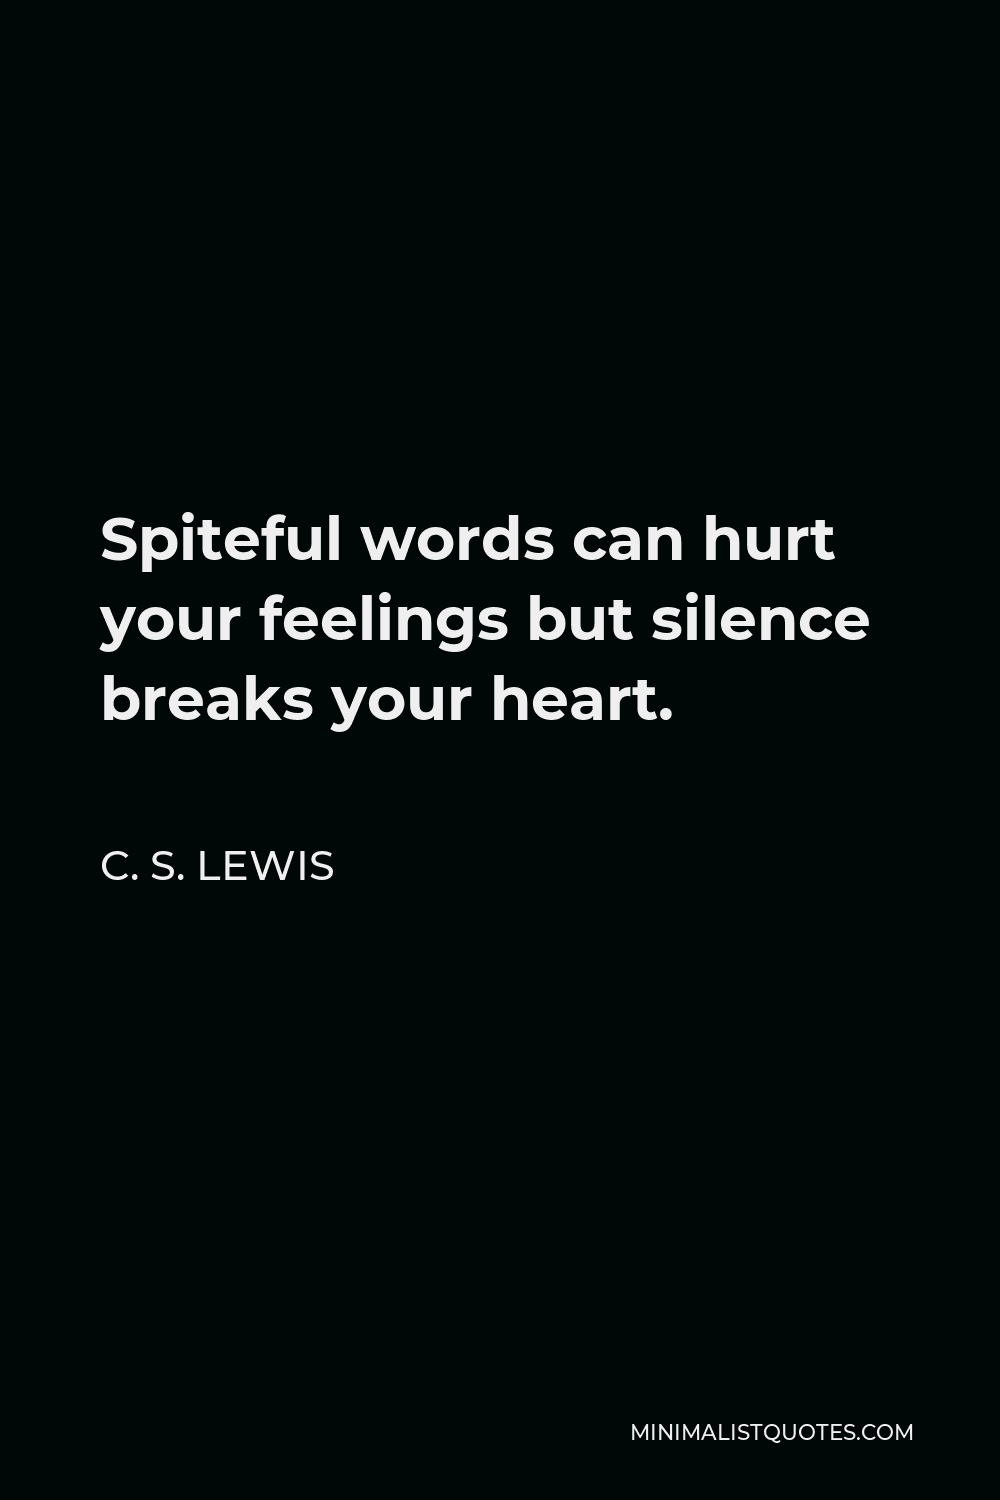 C. S. Lewis Quote - Spiteful words can hurt your feelings but silence breaks your heart.